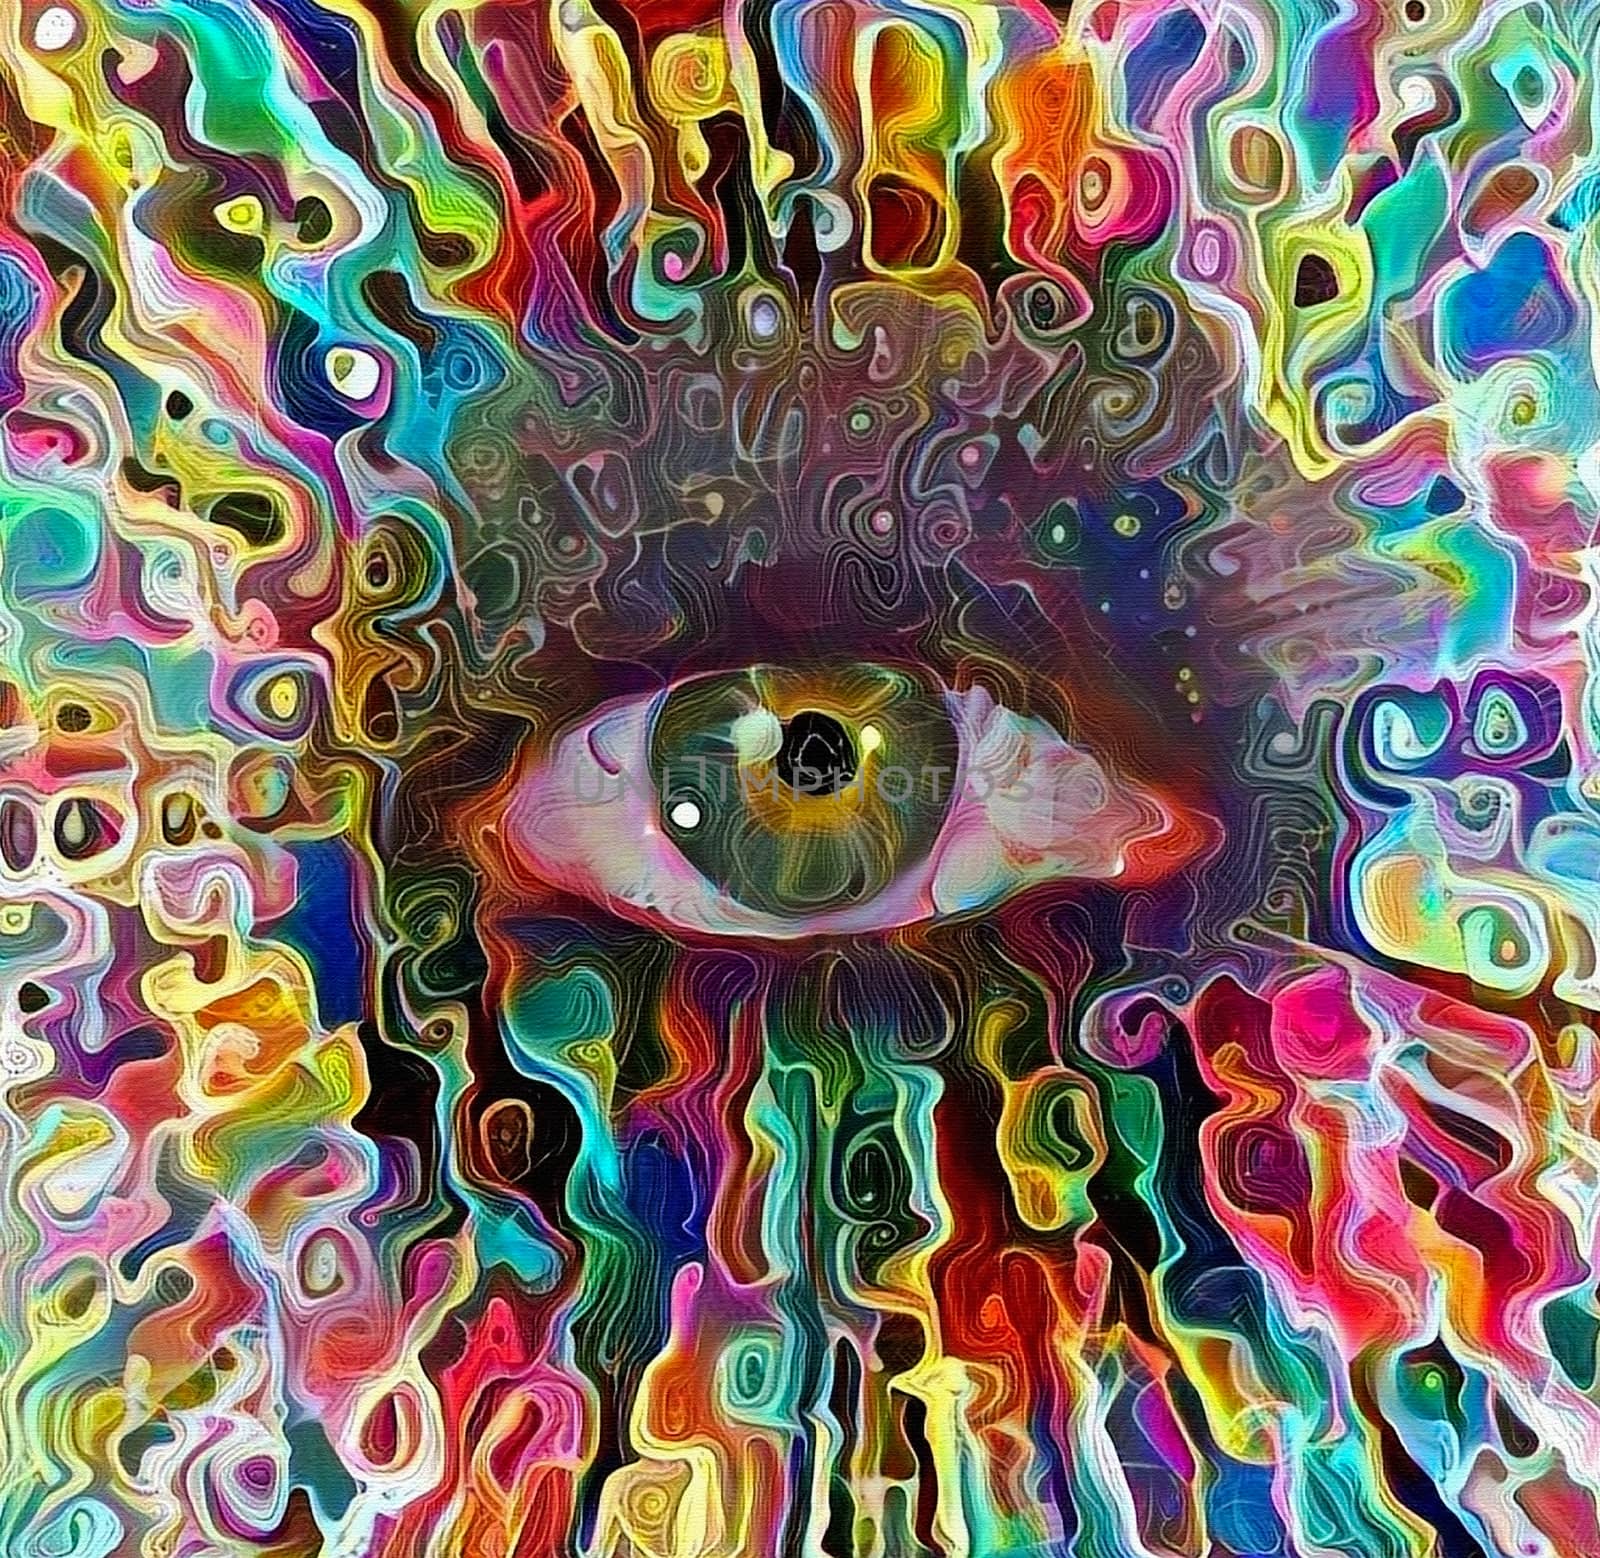 Abstract painting. Colorful Eye